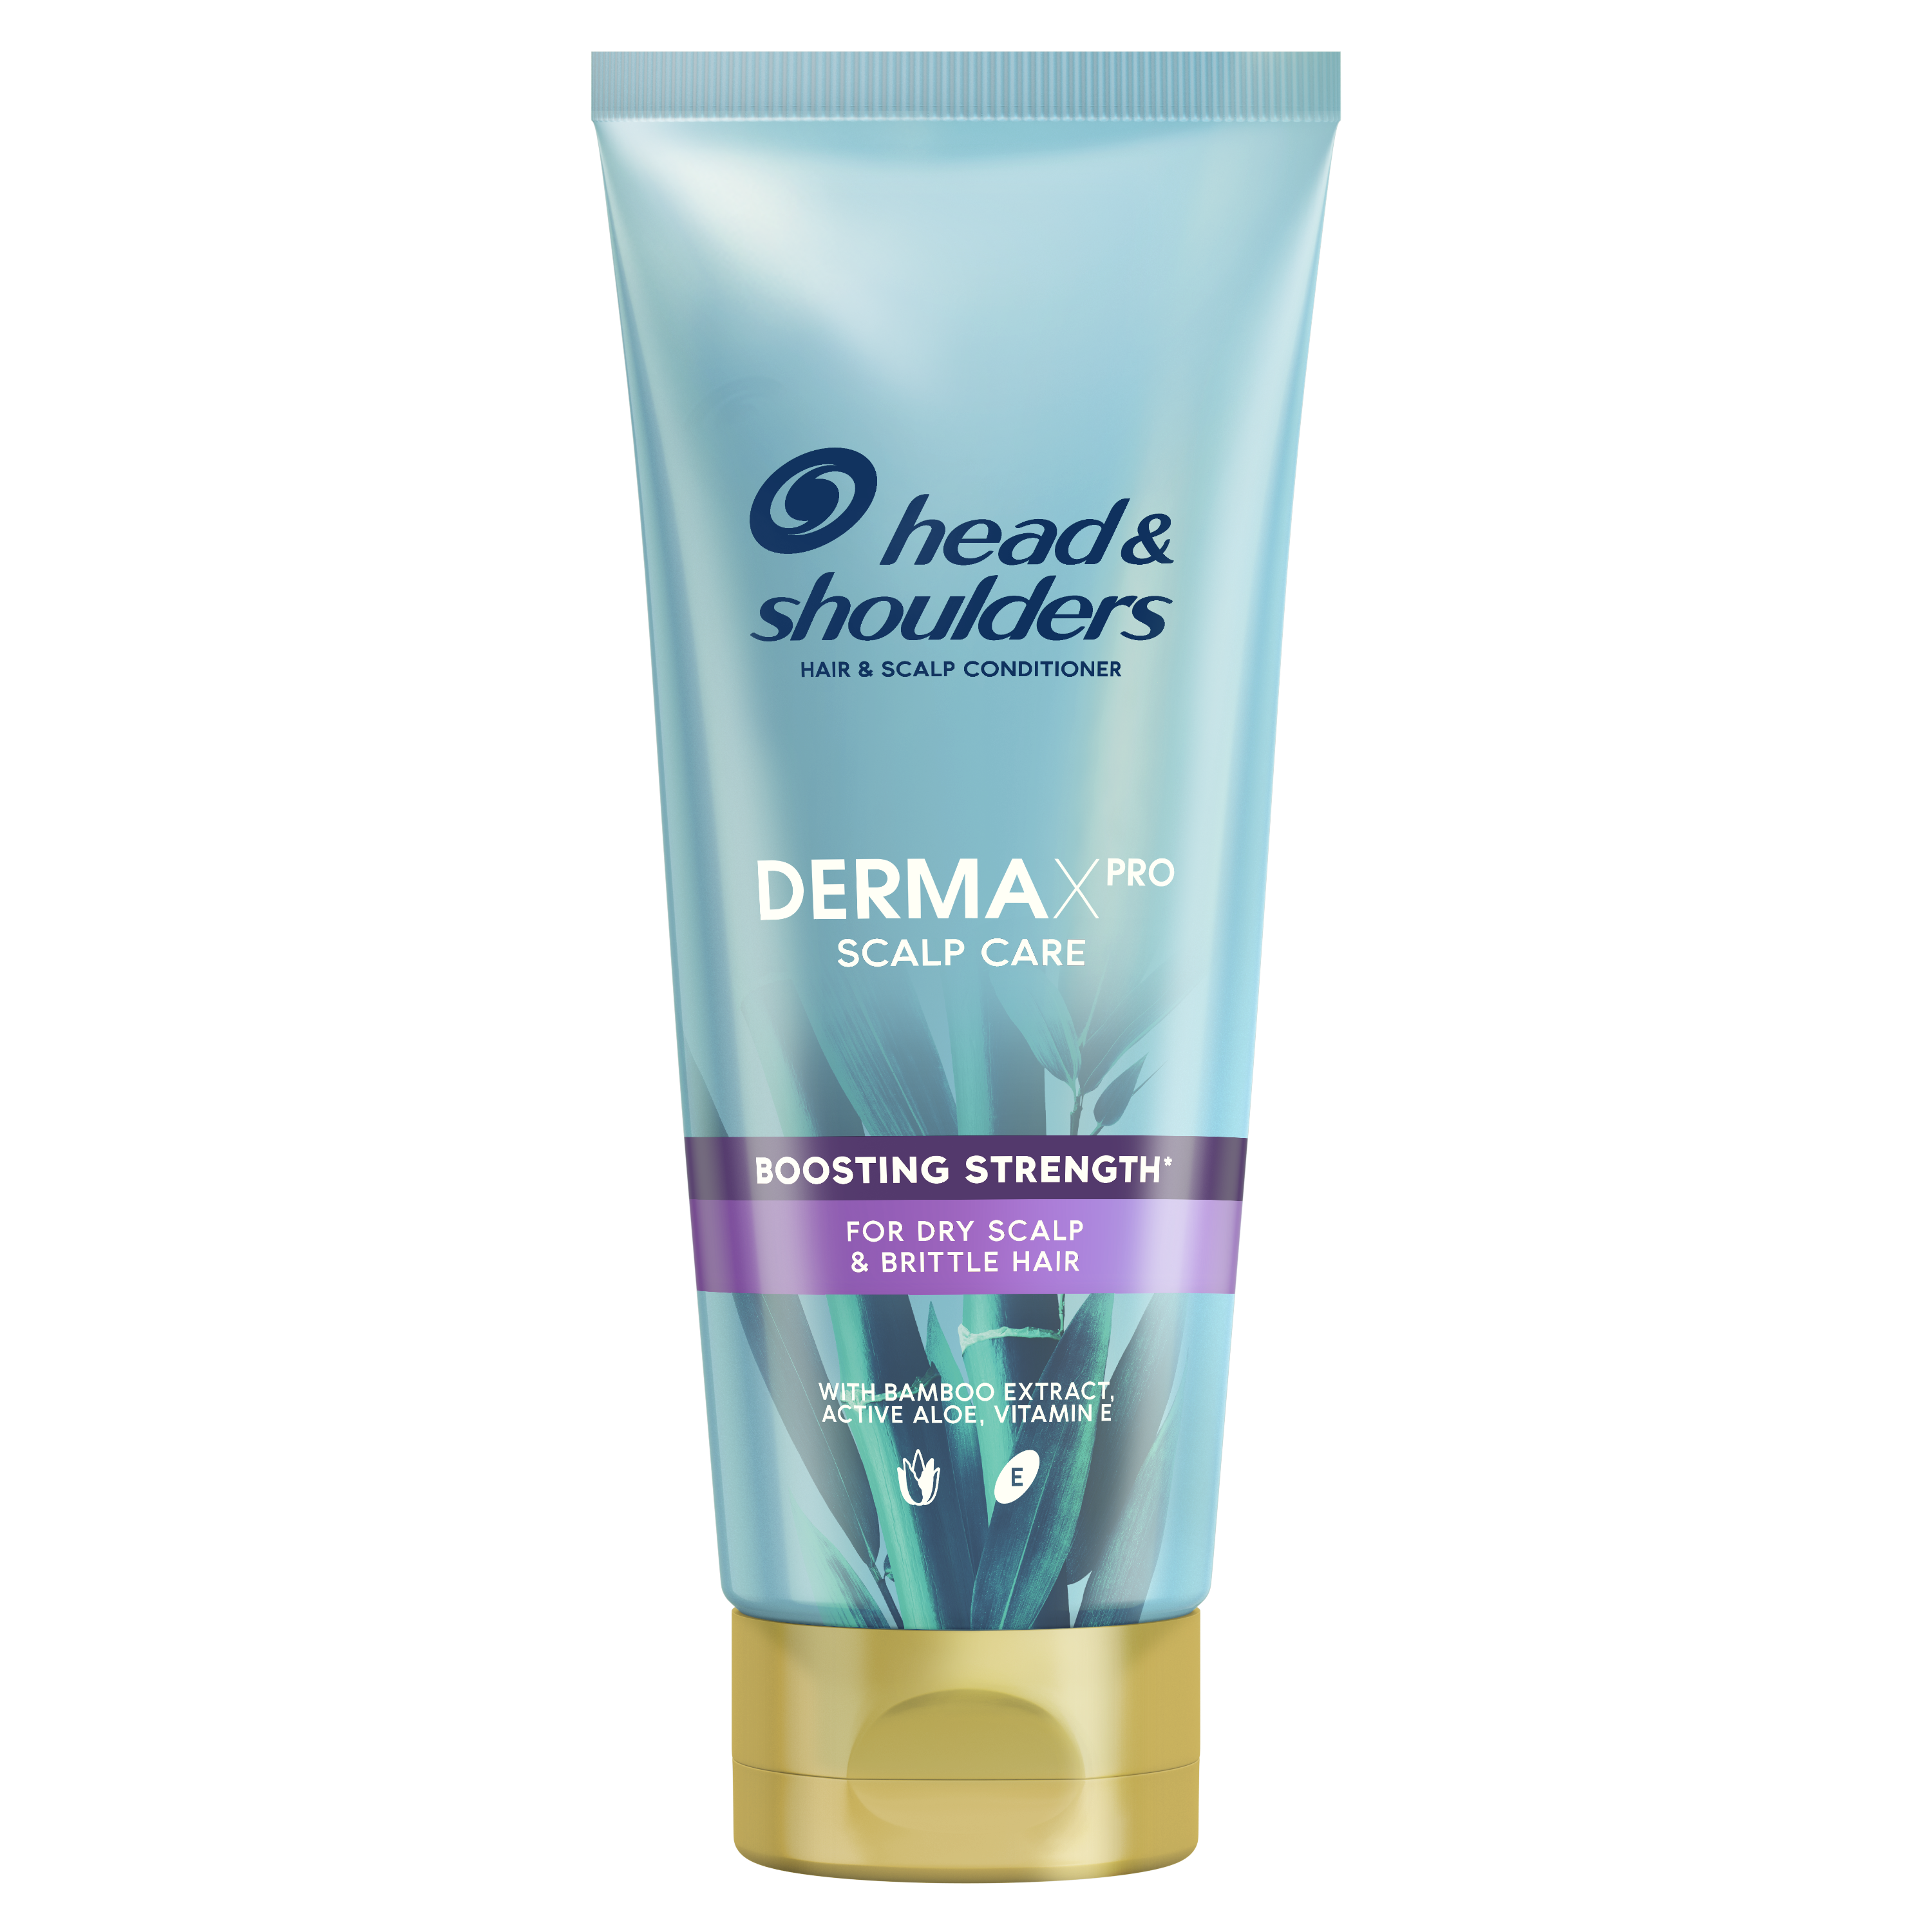 Derma XPRO Boosting Strength Conditioner